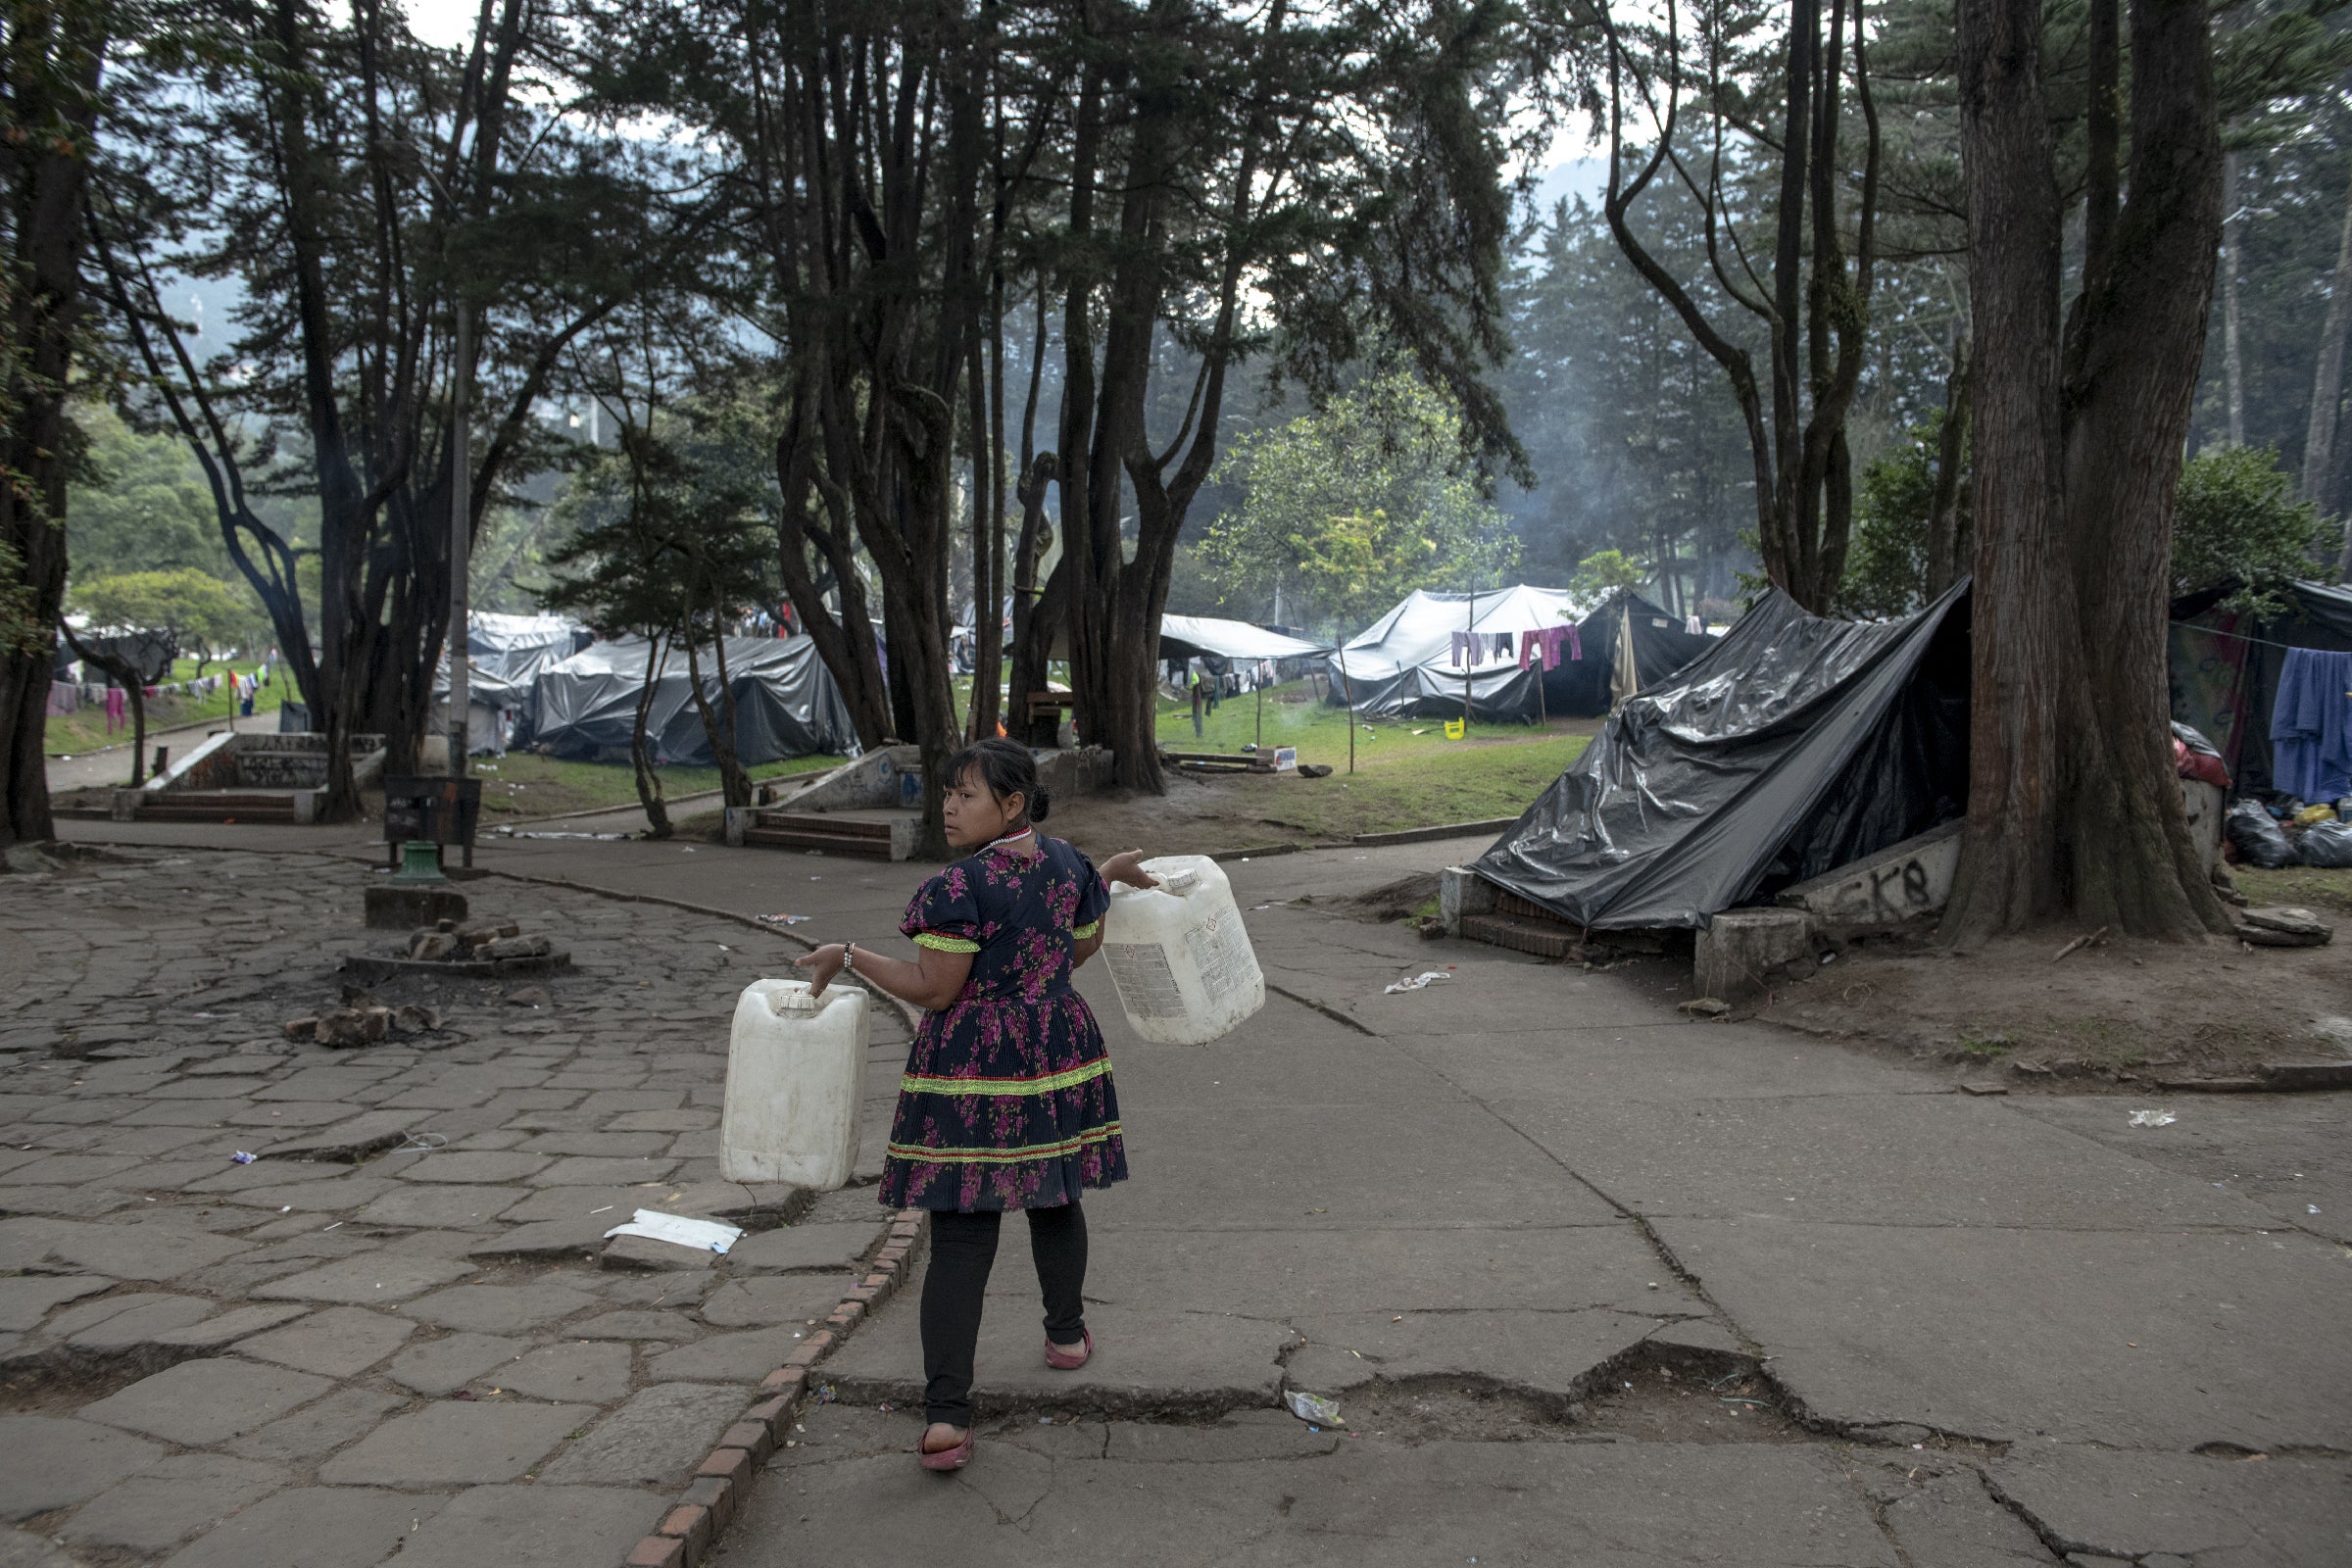 Maria Lubia Queracama Tanigama carries two cans to fill at the spring that provides water for the protest camp in National Park in the centre of Bogota